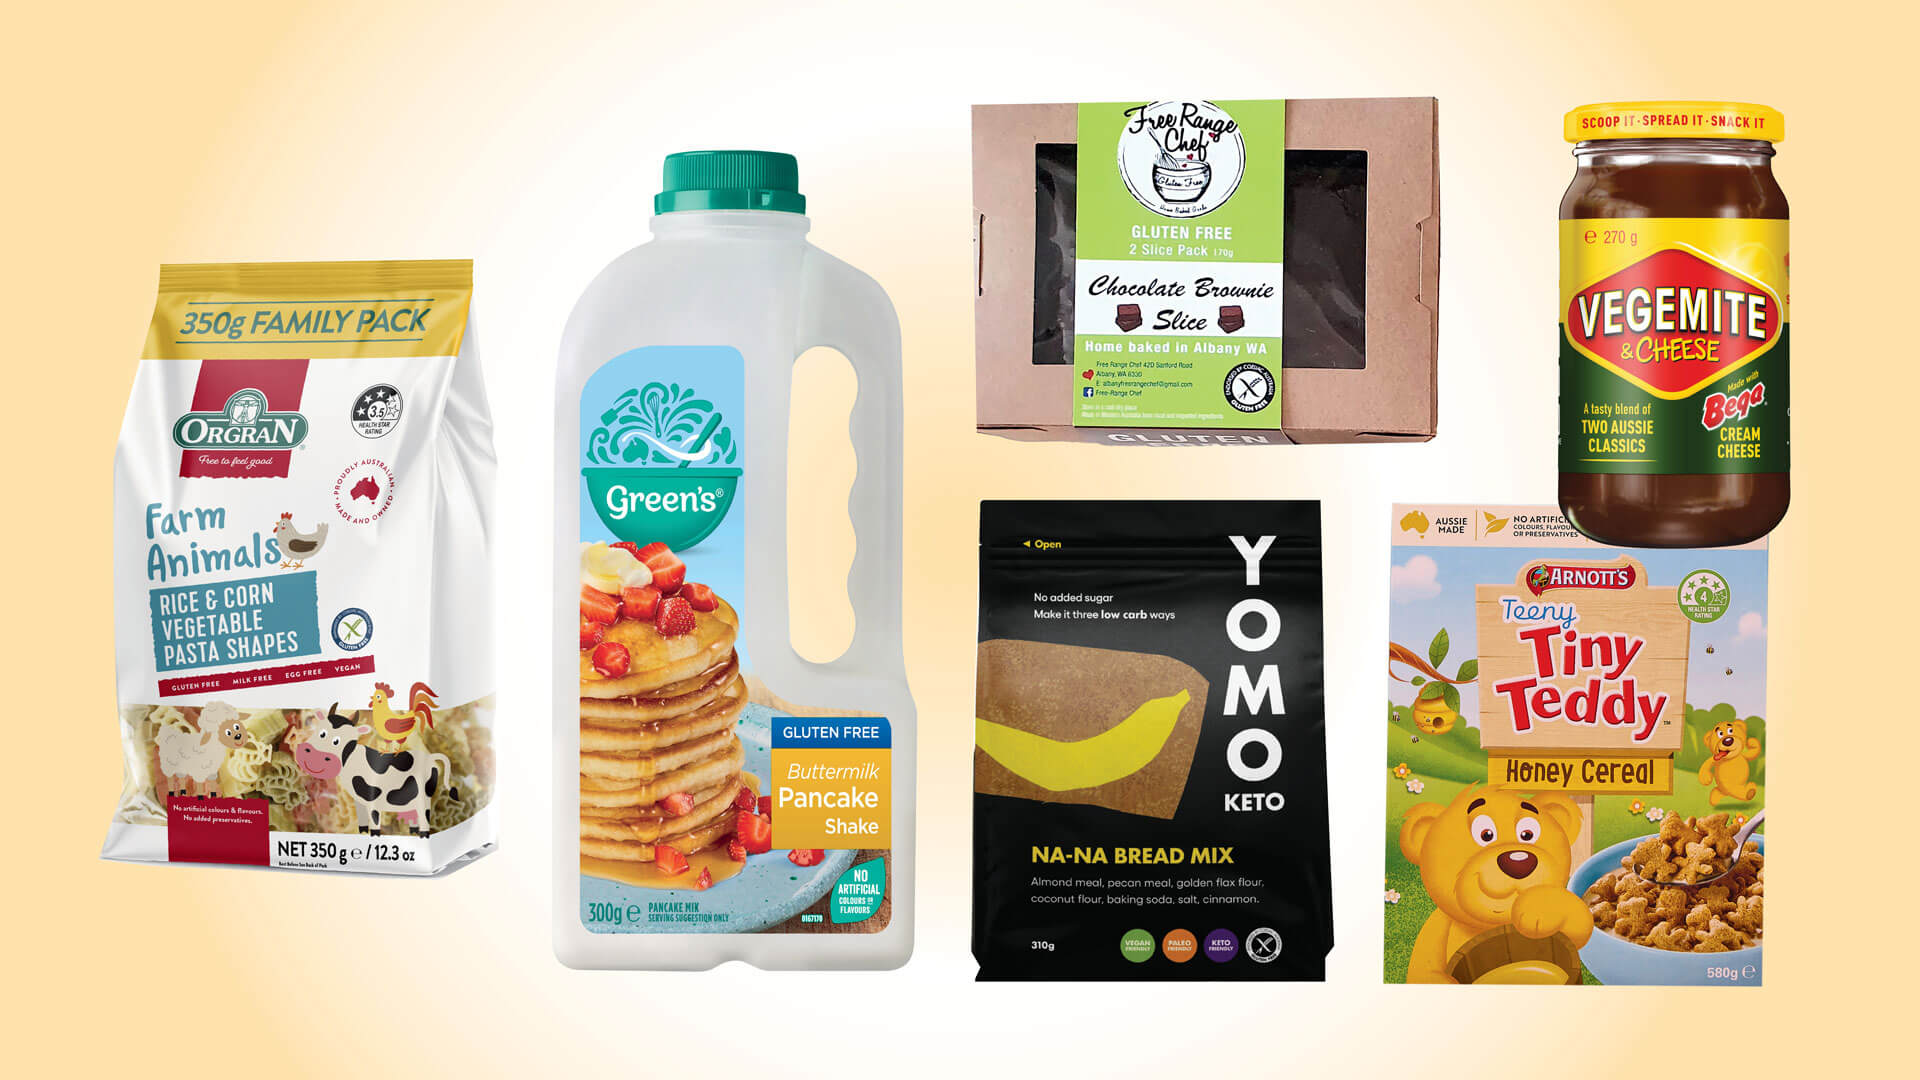 Gluten-Free Living: latest products endorsed by Coeliac Australia